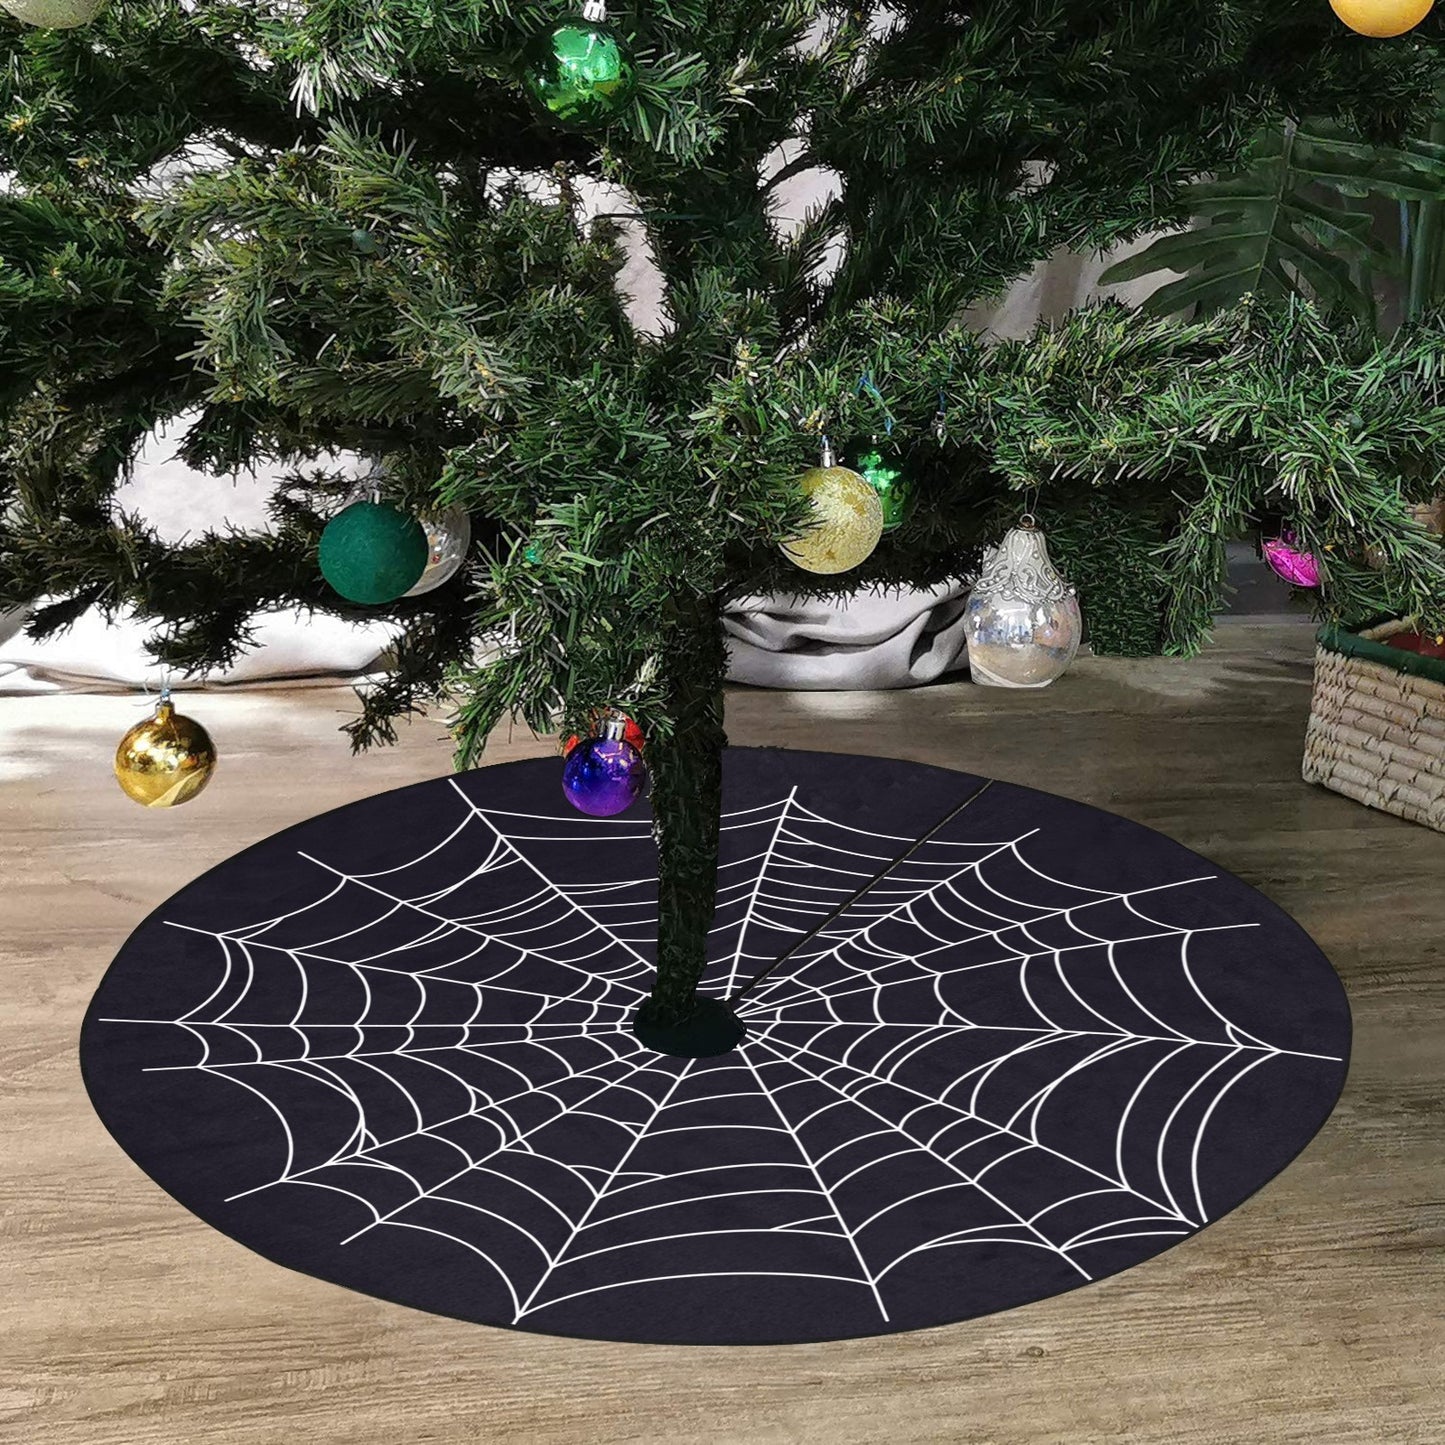 Spiderweb Halloween Tree Skirt, Black Goth Vampire Christmas Spooky Cover Decor Decoration All Hallows Eve Creepy 30 36 47 Small Large Party Starcove Fashion